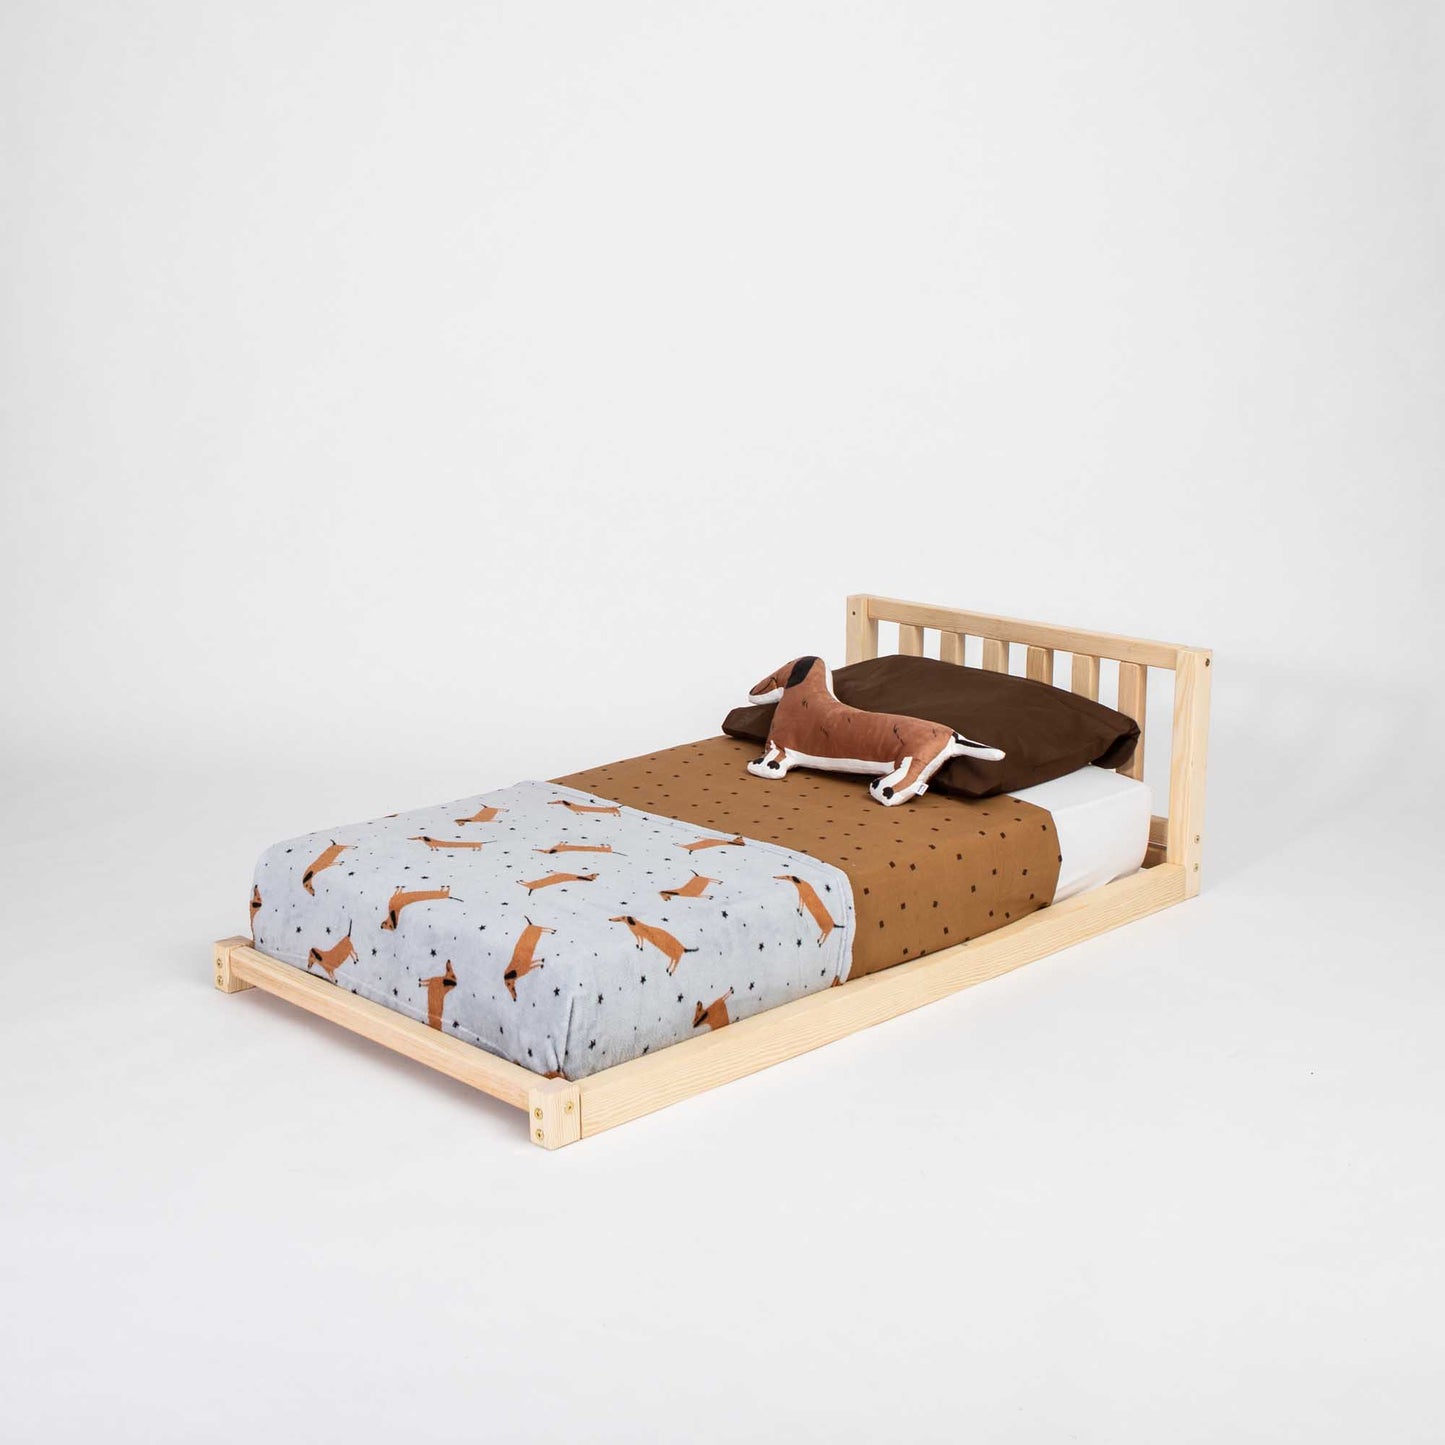 A Sweet Home From Wood 2-in-1 toddler bed on legs with a vertical rail headboard, made of solid pine or birch wood, with a dog resting on it.